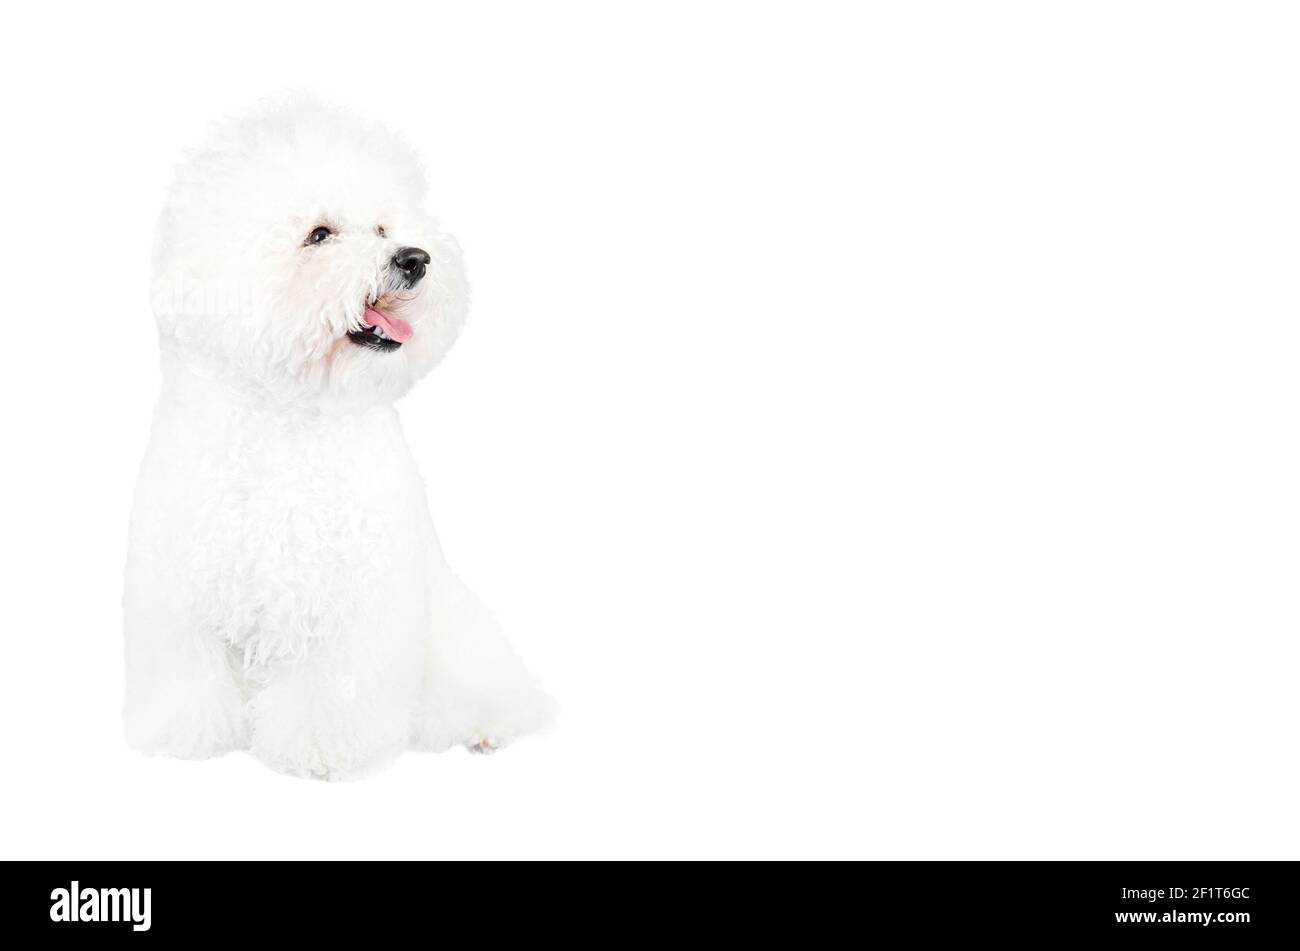 Close-up of a Bichon Frise dog sitting against a white background sticking the tongue out. Stock Photo